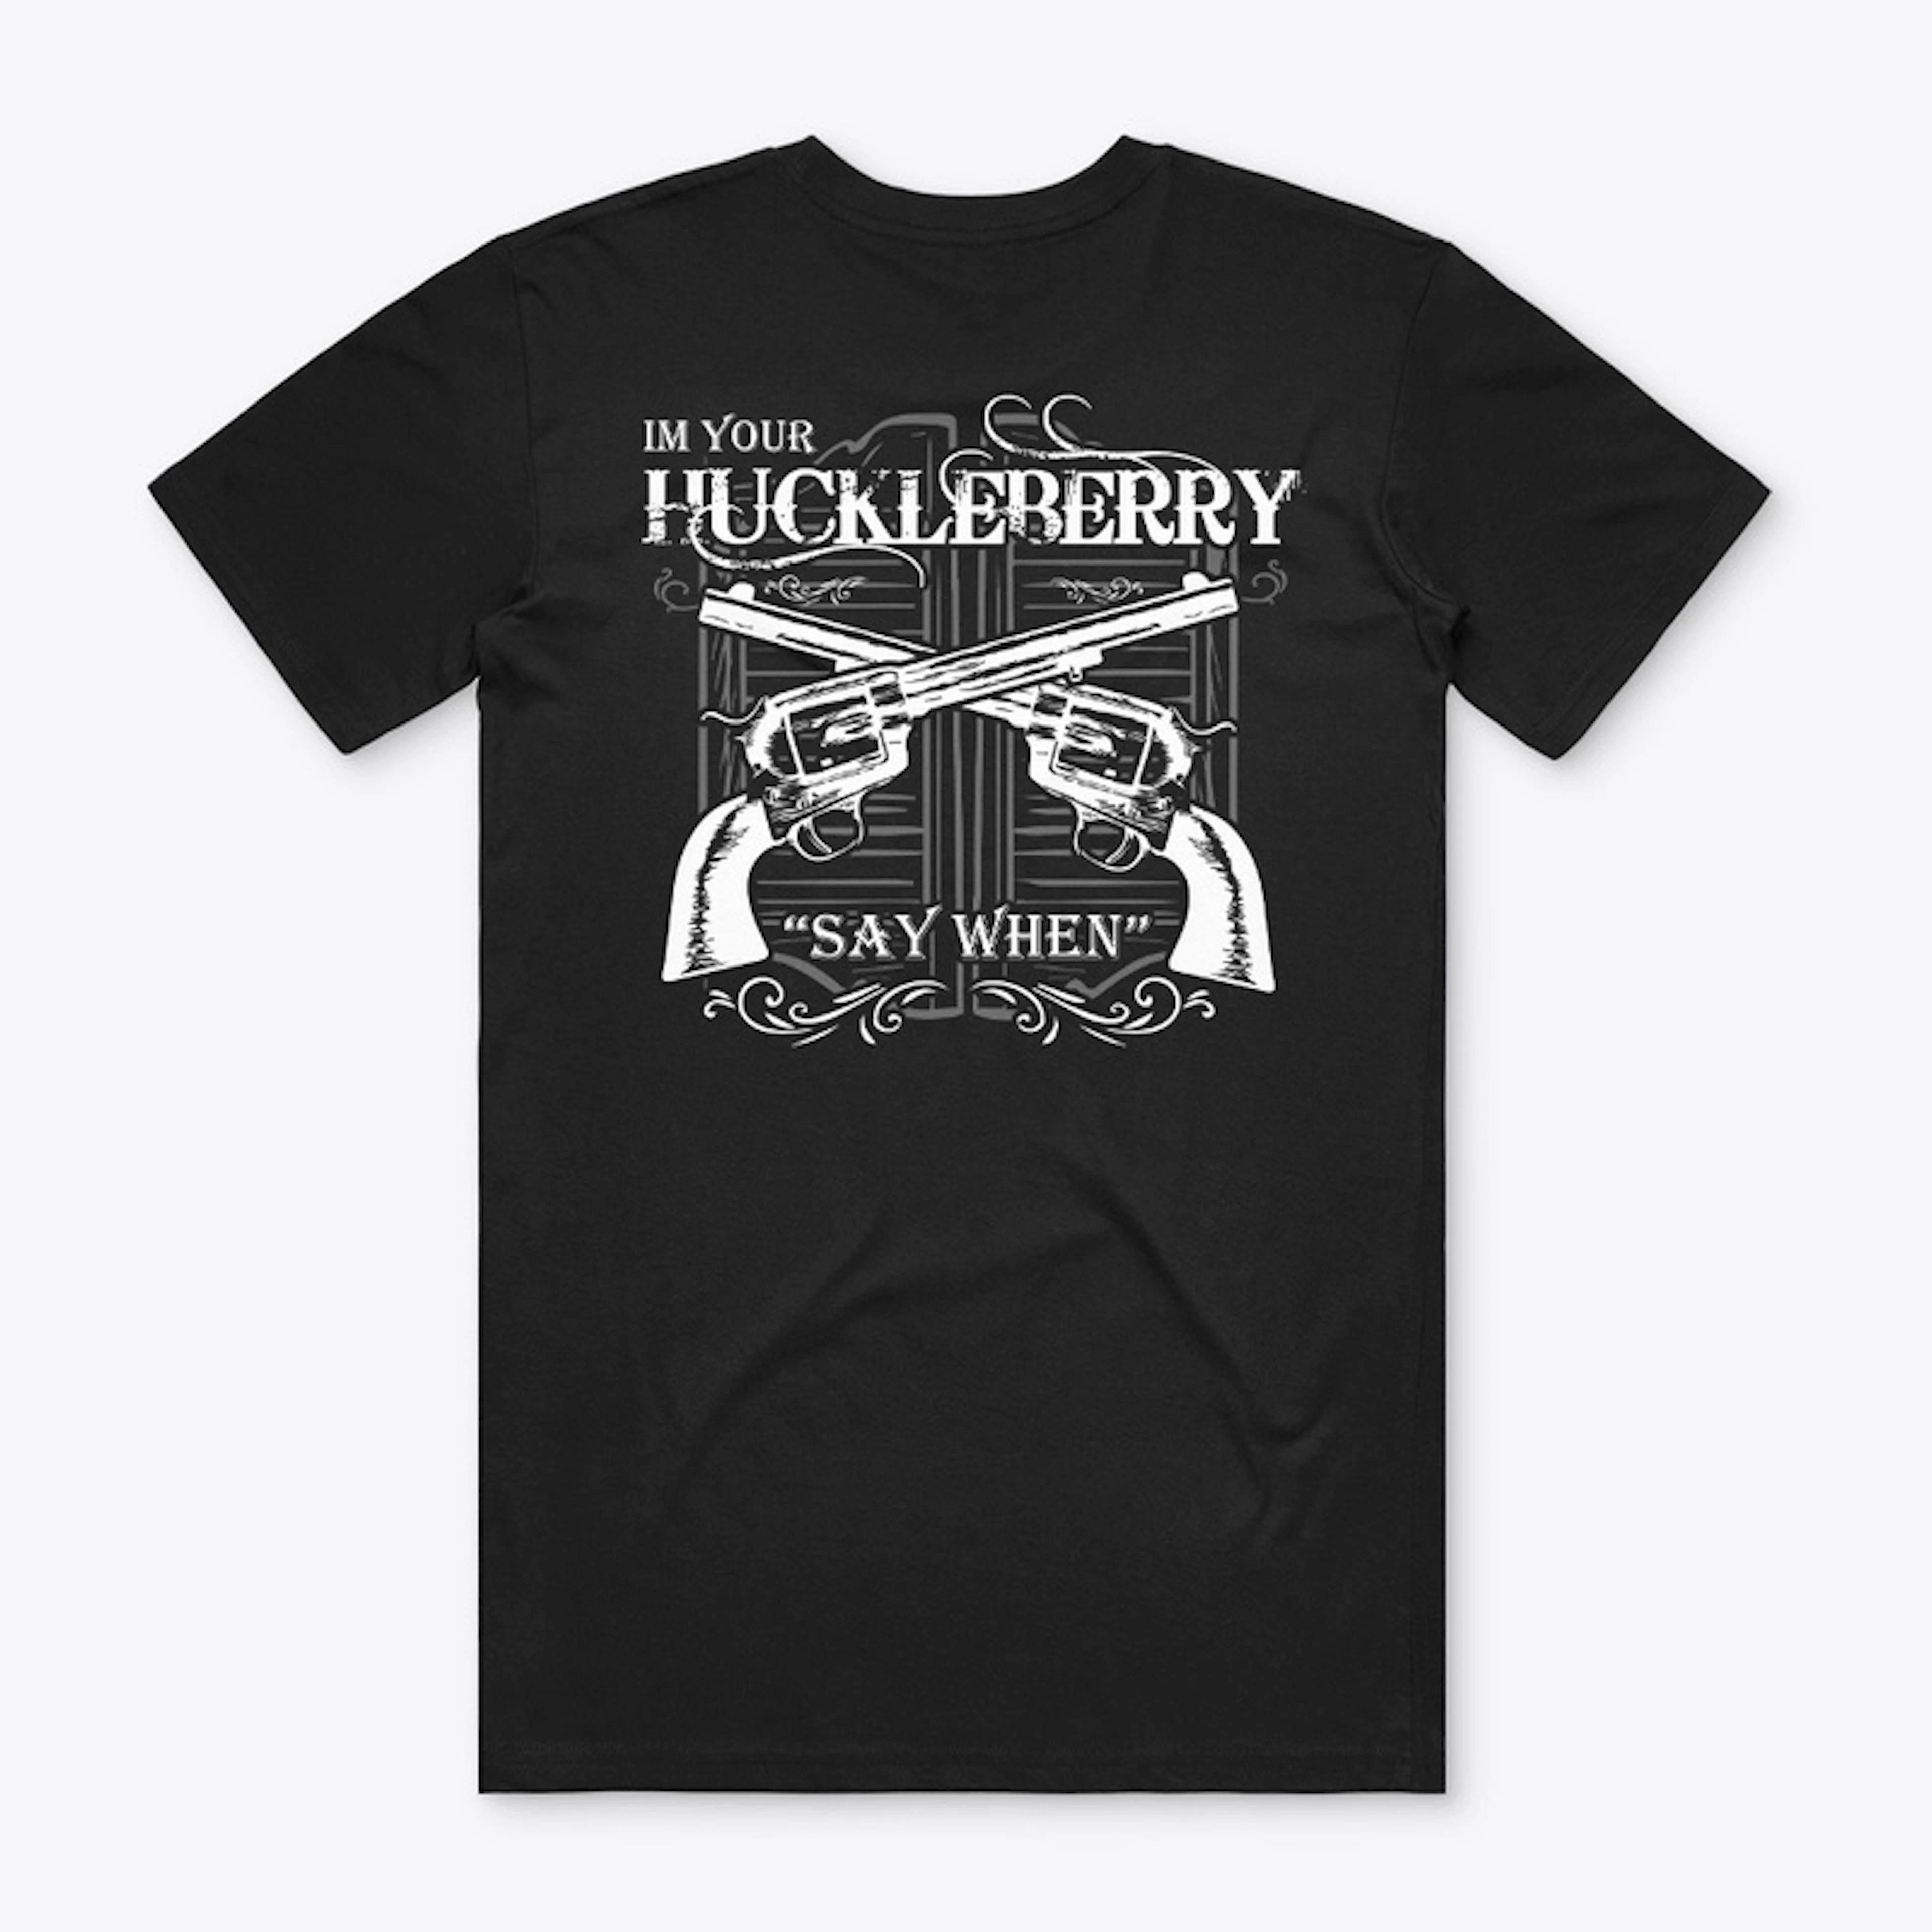 Im Your Huckleberry "Say When"